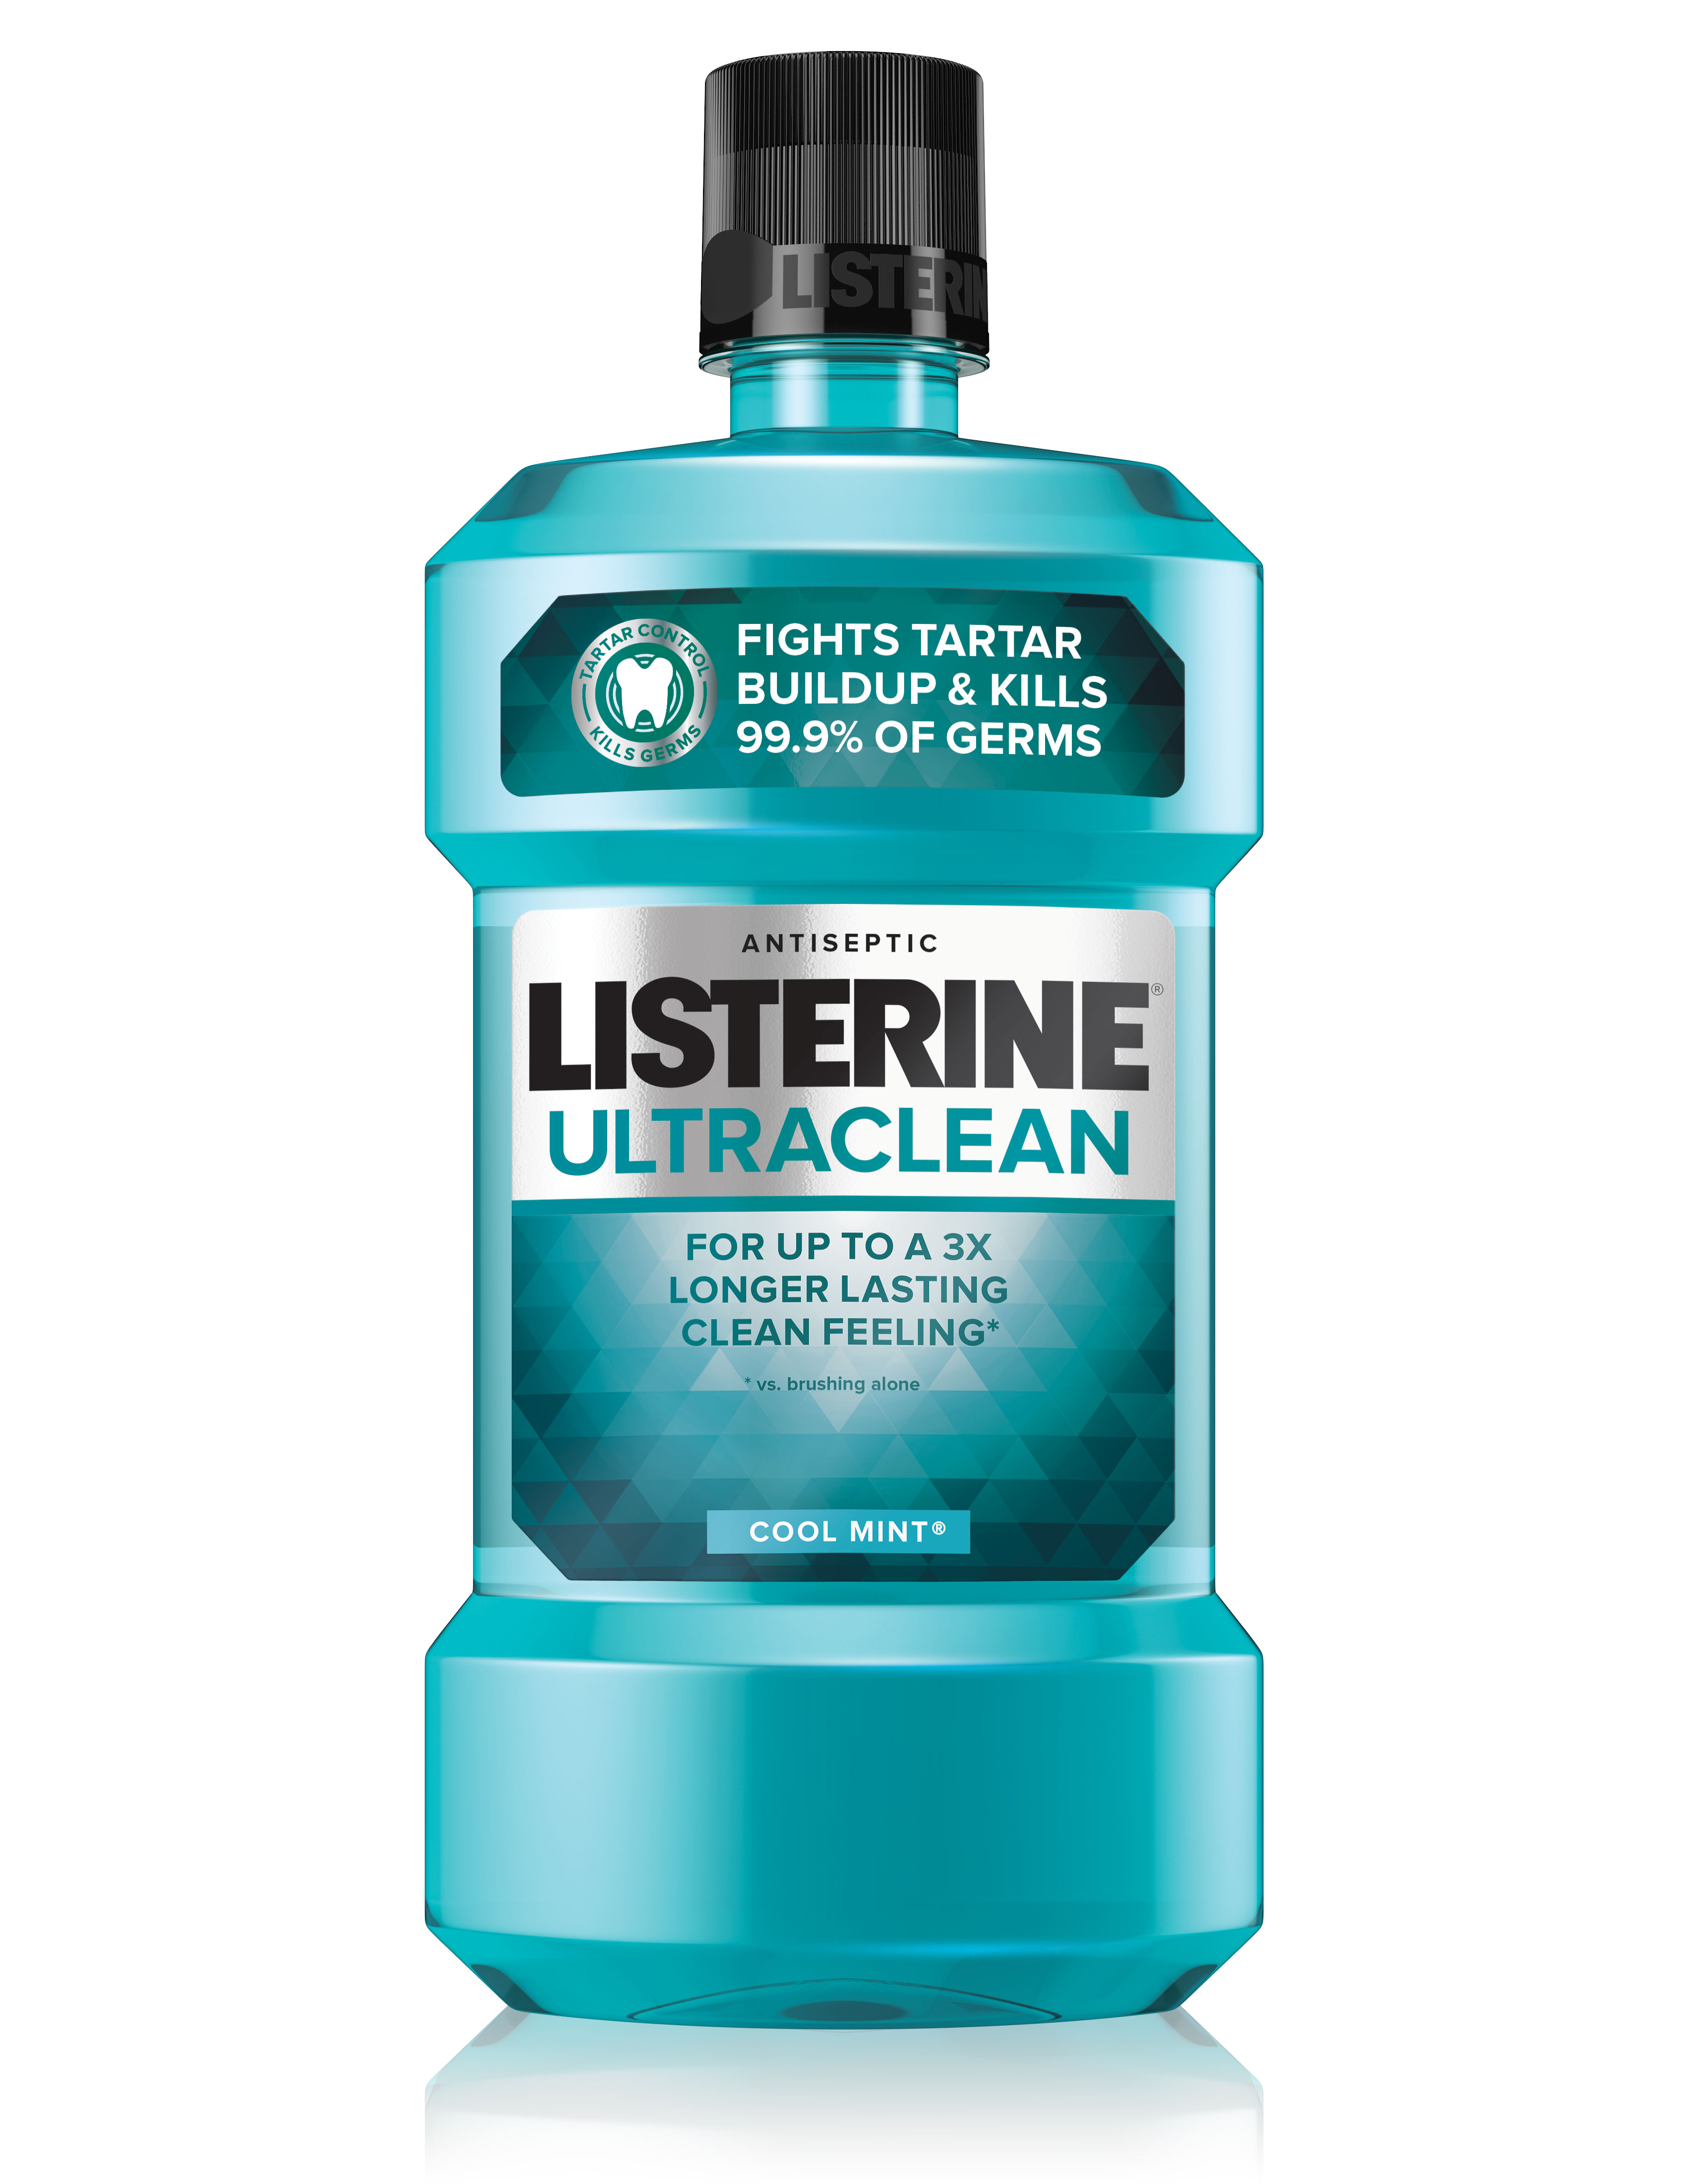 listerine-ultraclean-cool-mint-antiseptic-mouthwash-listerine